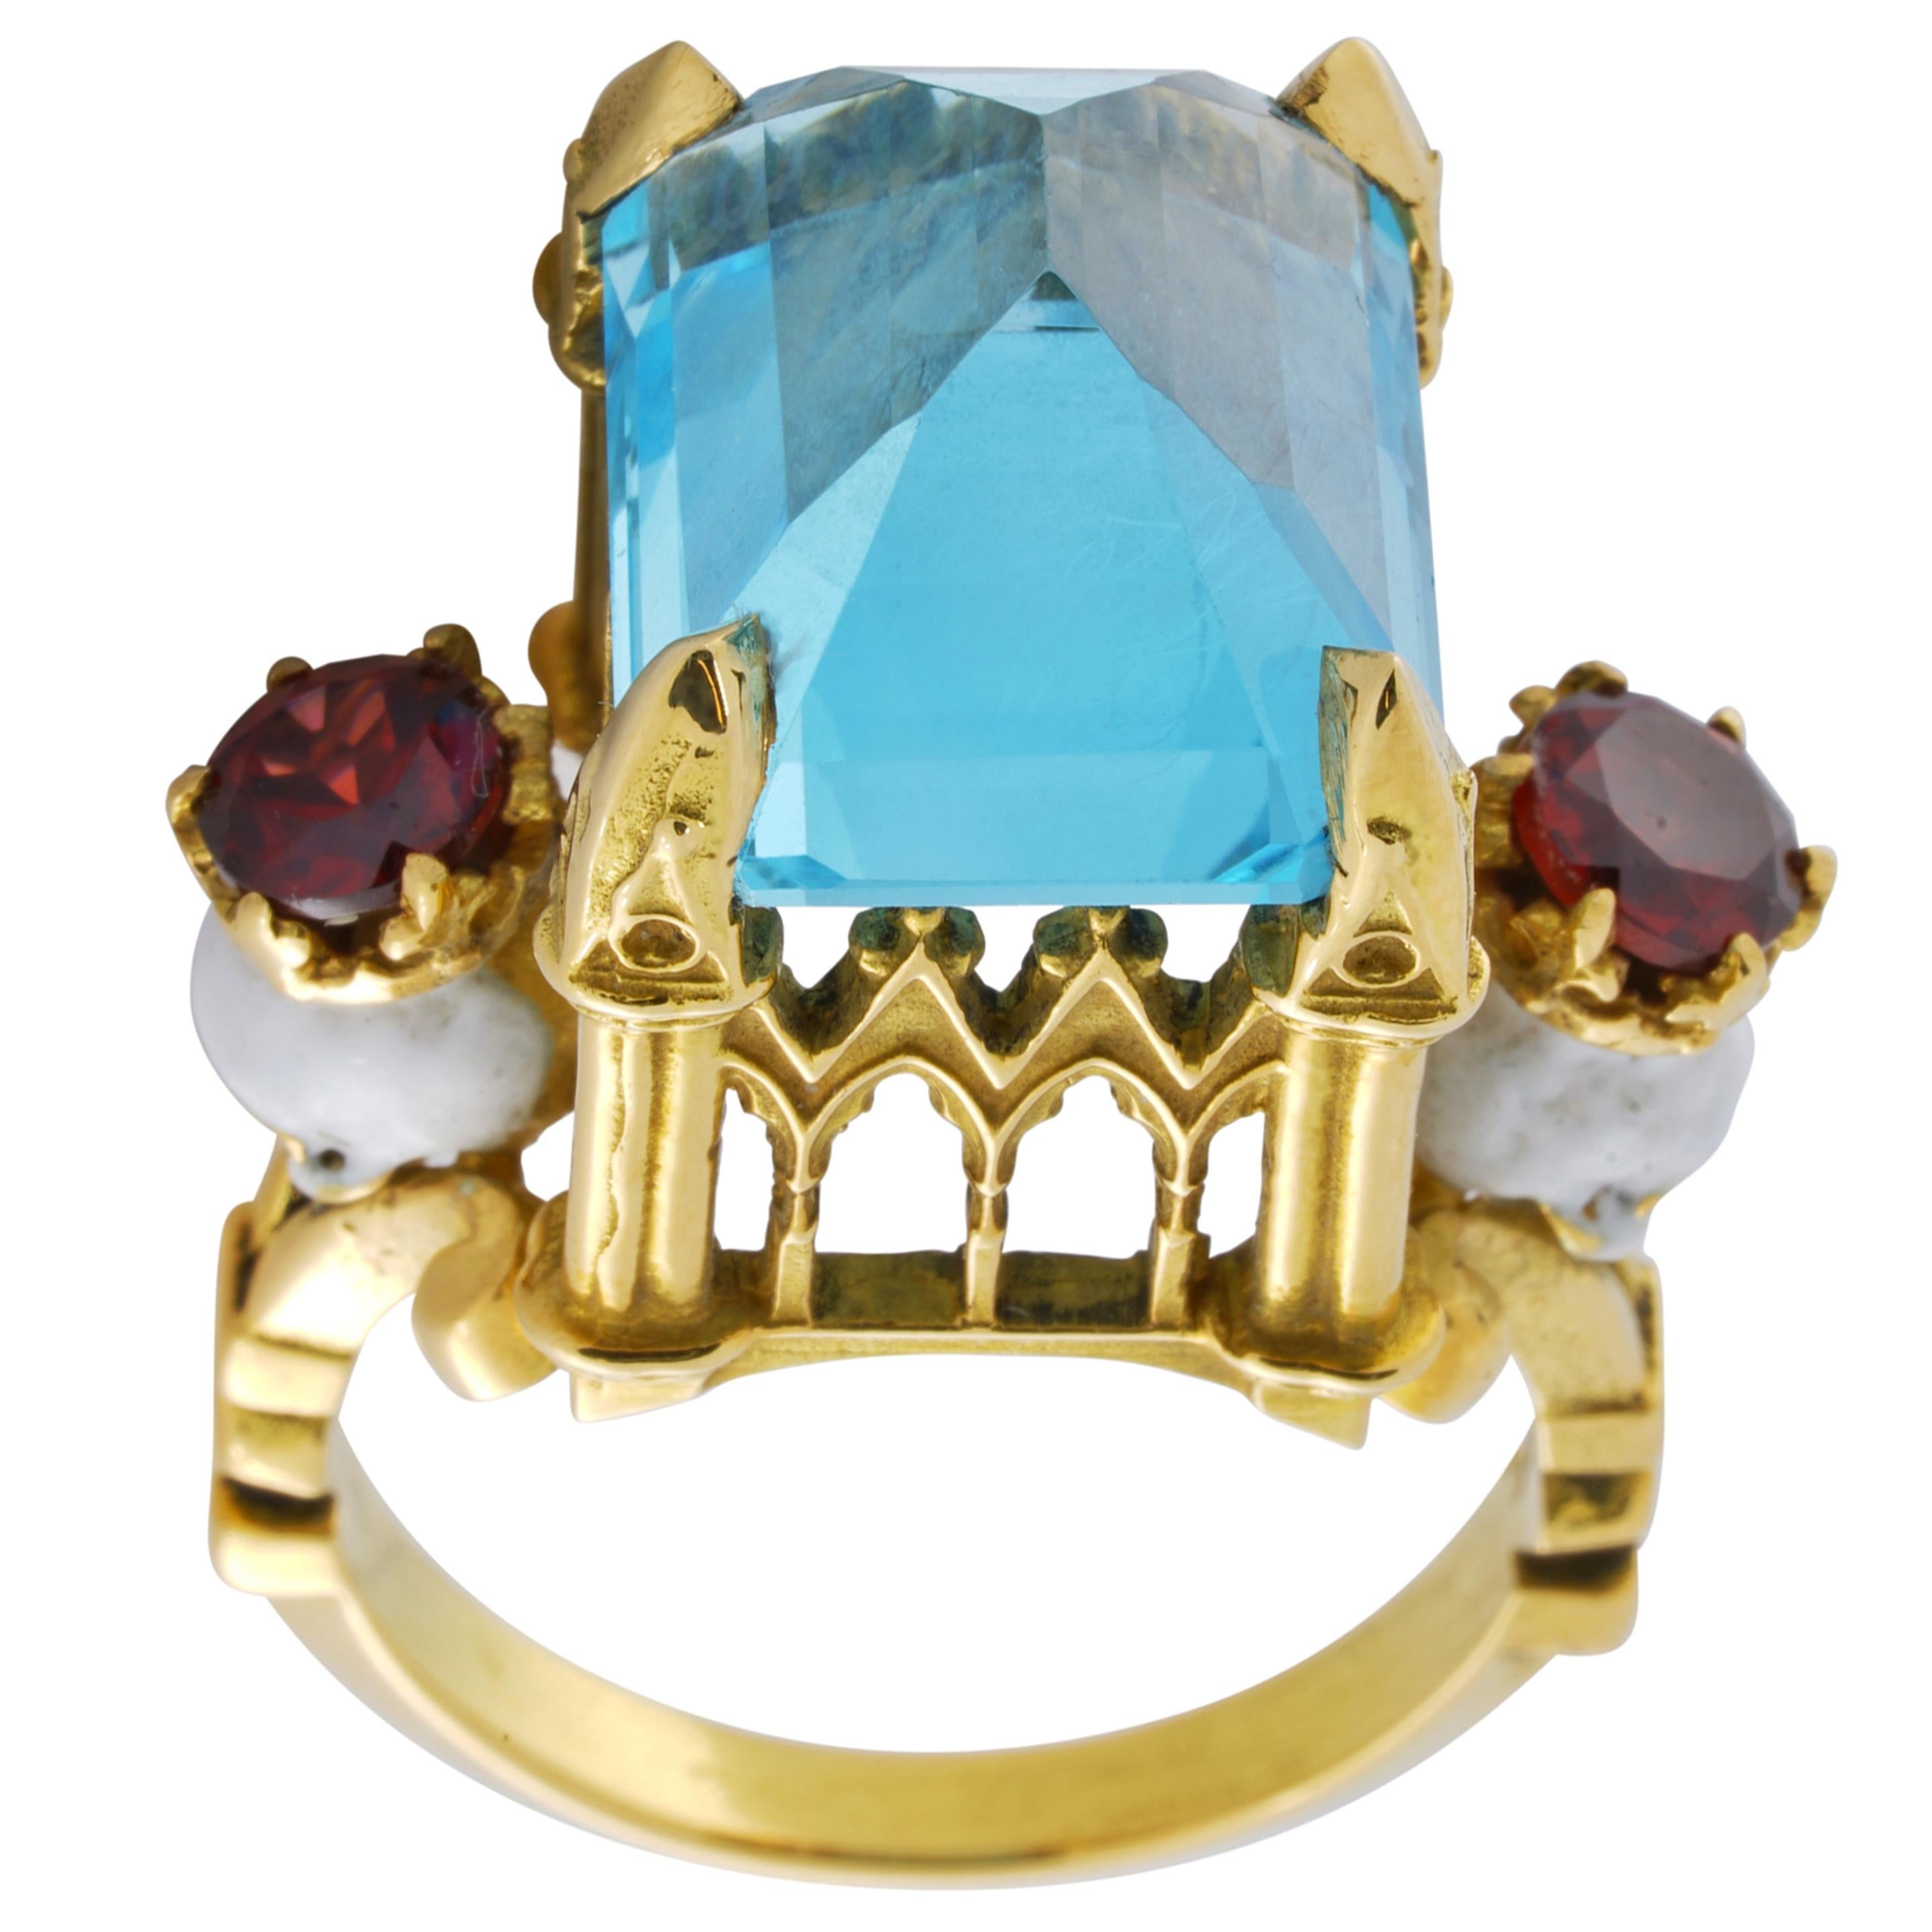 Baroque Catacomb Saints Cathedral Ring in 18 Karat Yellow Gold with Topaz and Garnets For Sale